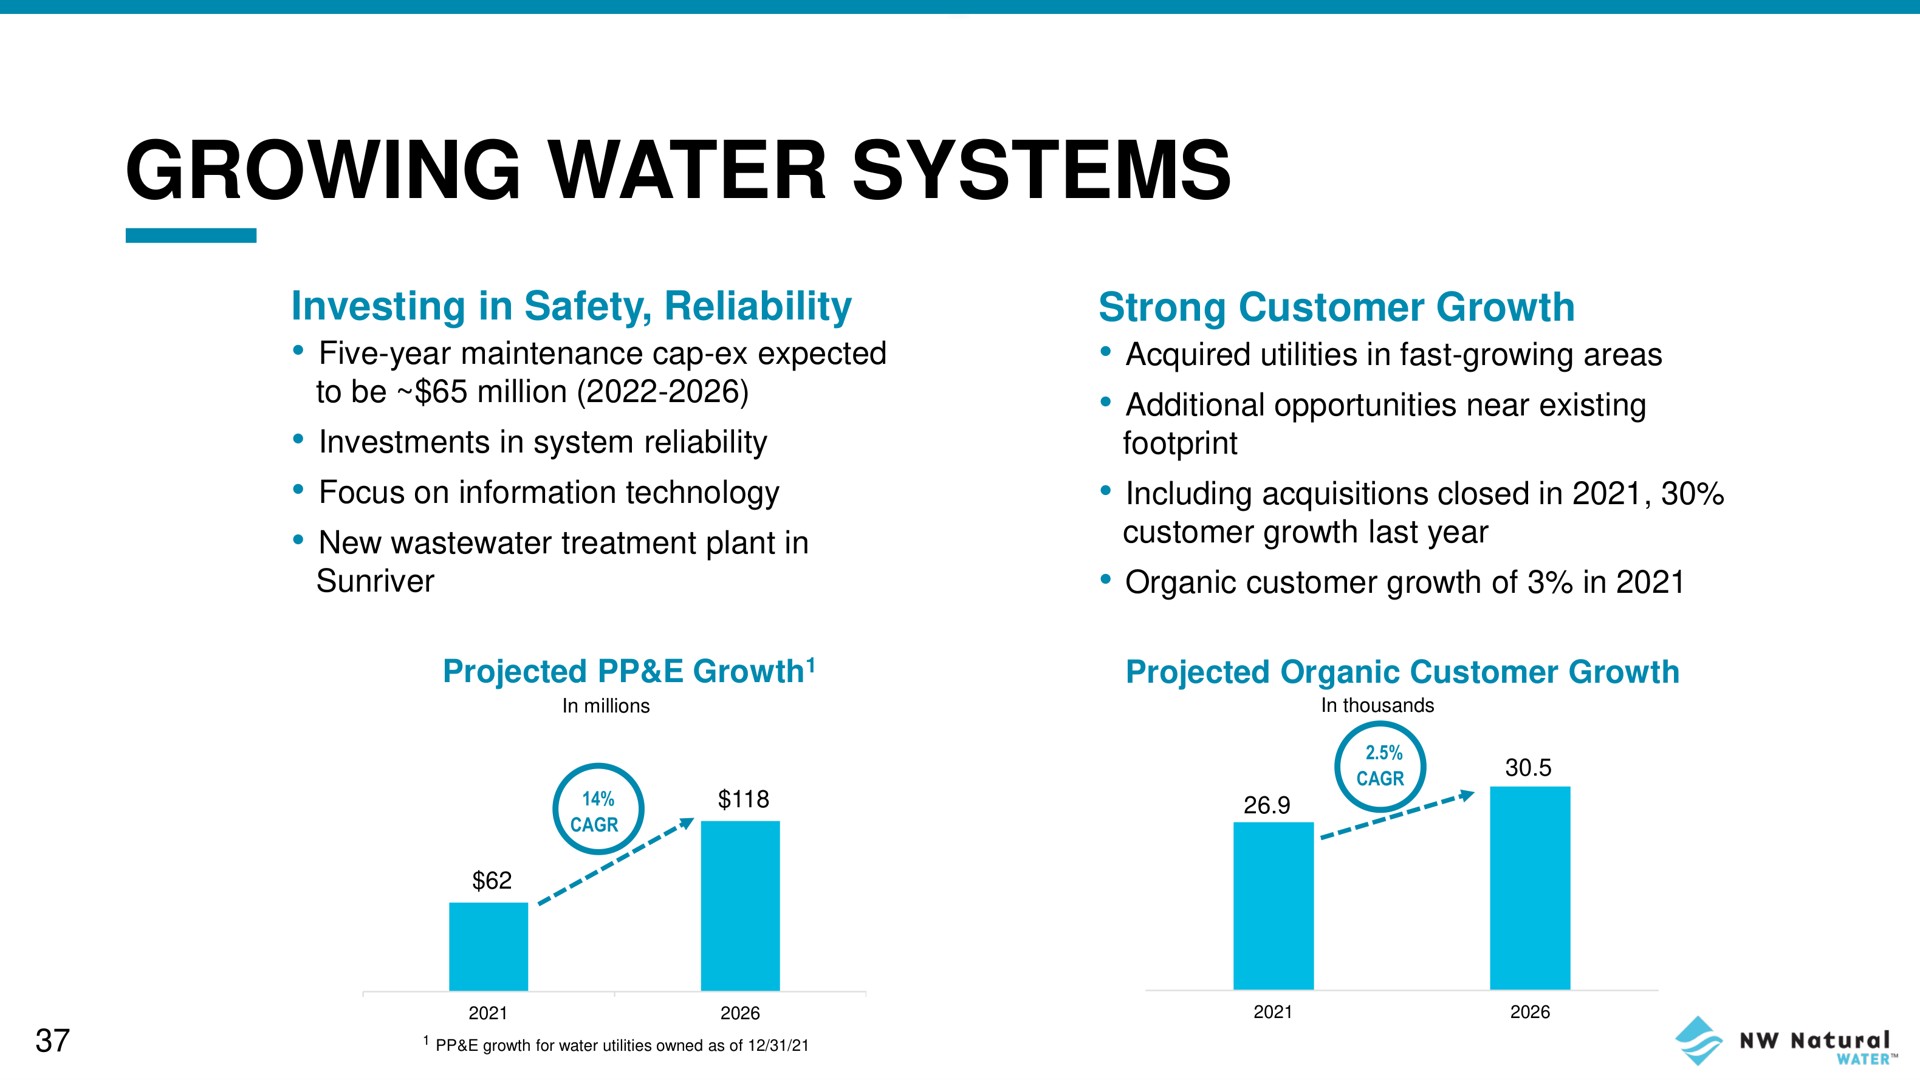 growing water systems | NW Natural Holdings